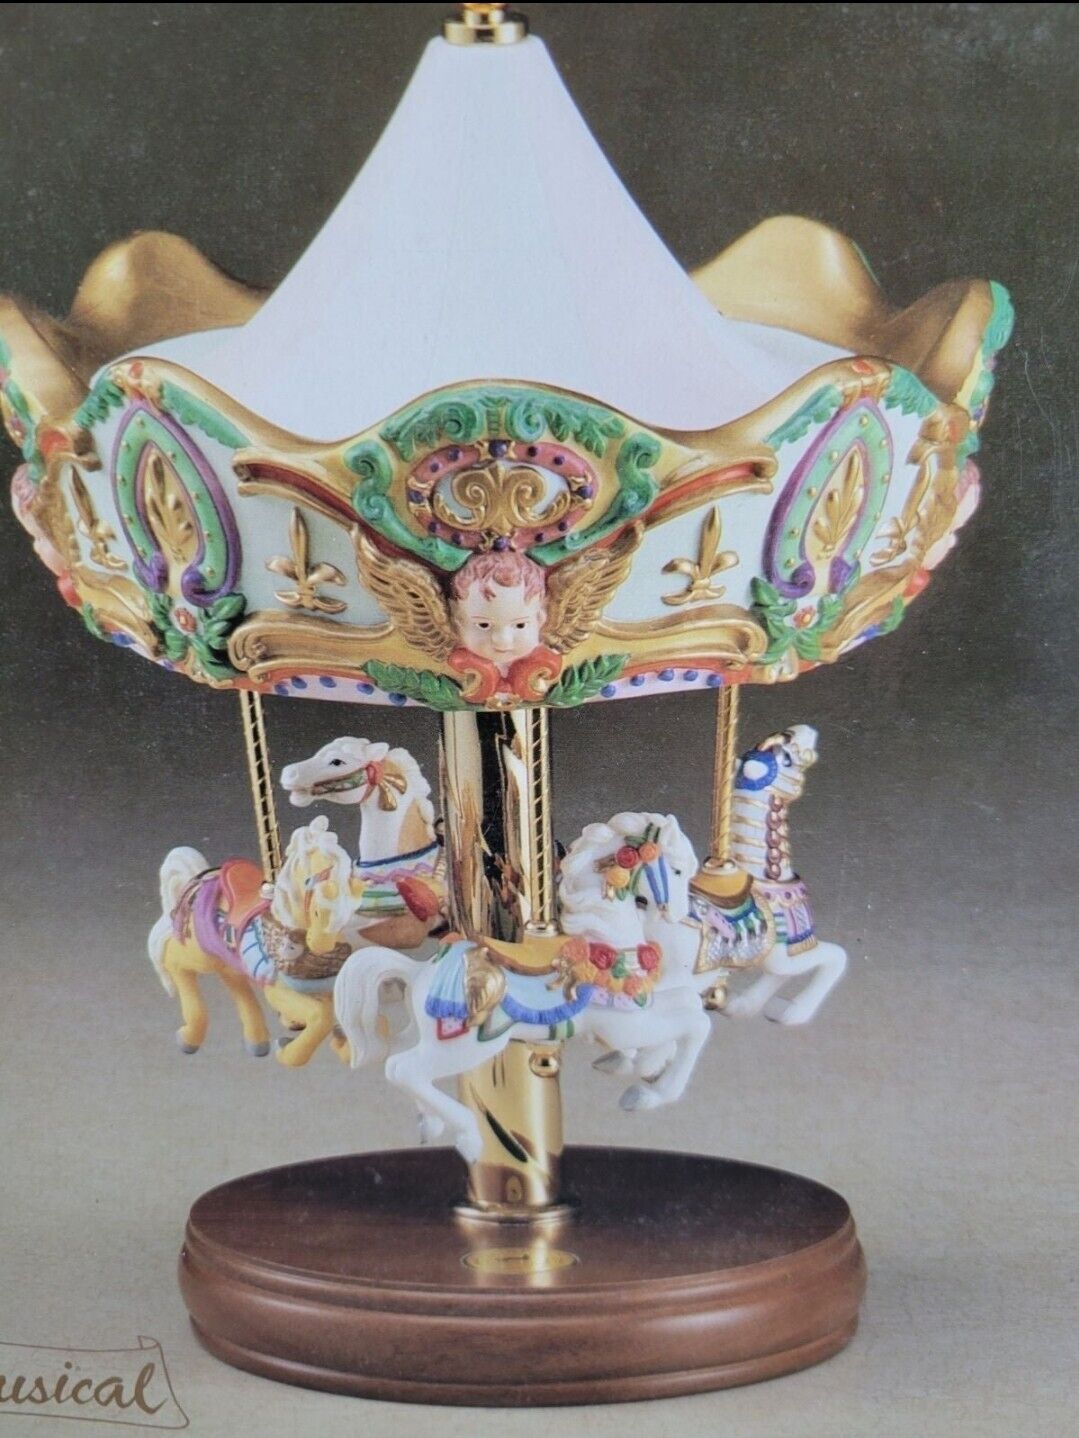 4 Horse Tobin Fraley Willitts LIMITED EDITION American Carousel Waltz Music